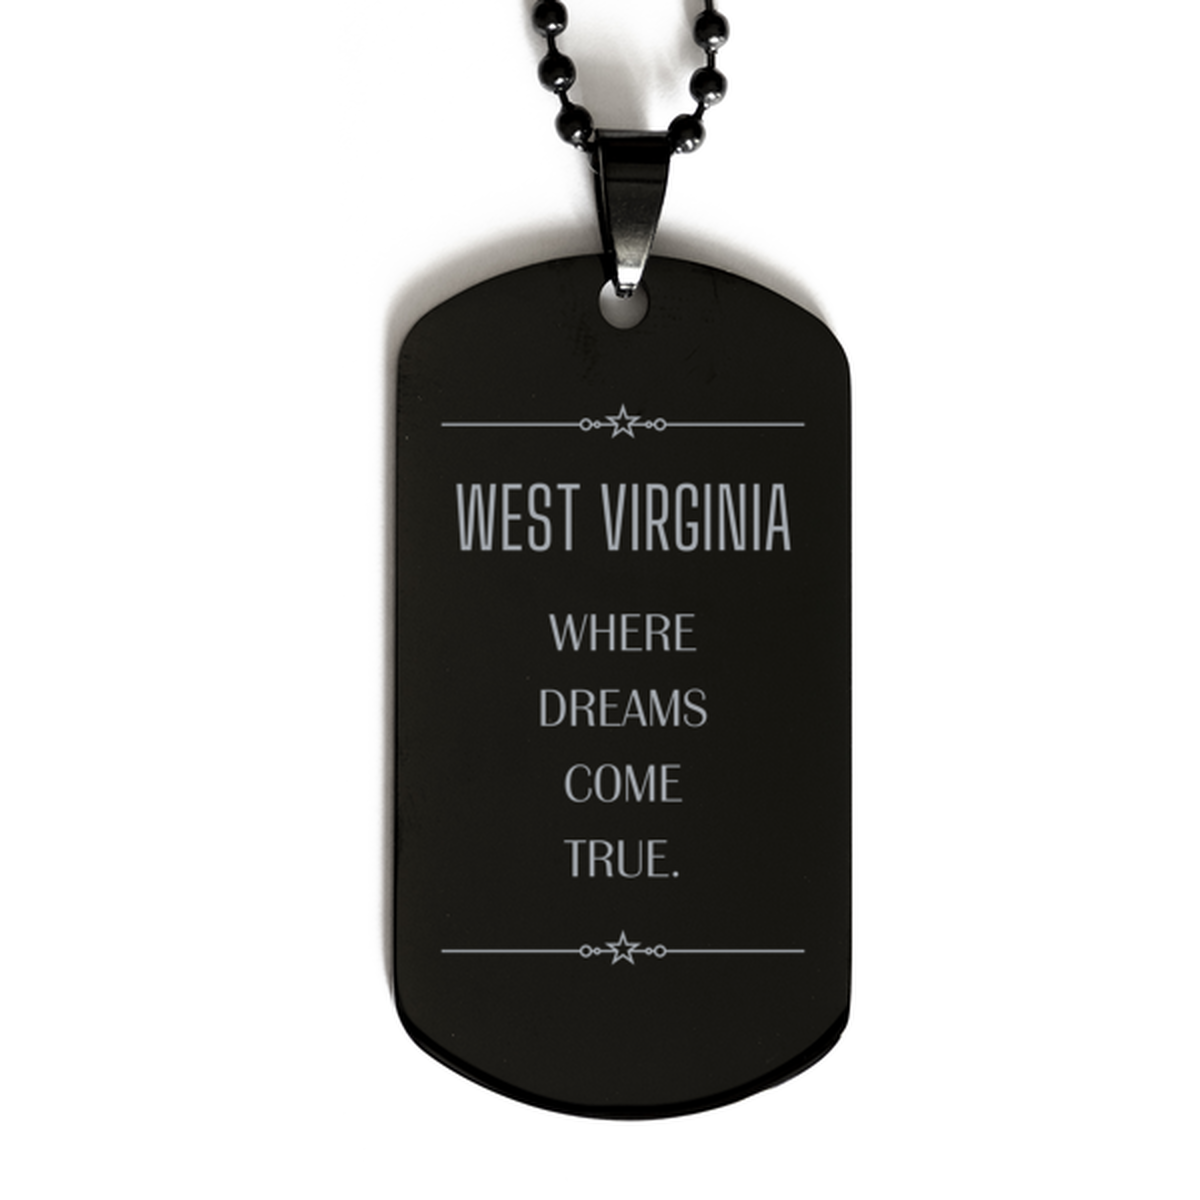 Love West Virginia State Black Dog Tag, West Virginia Where dreams come true, Birthday Inspirational Gifts For West Virginia Men, Women, Friends